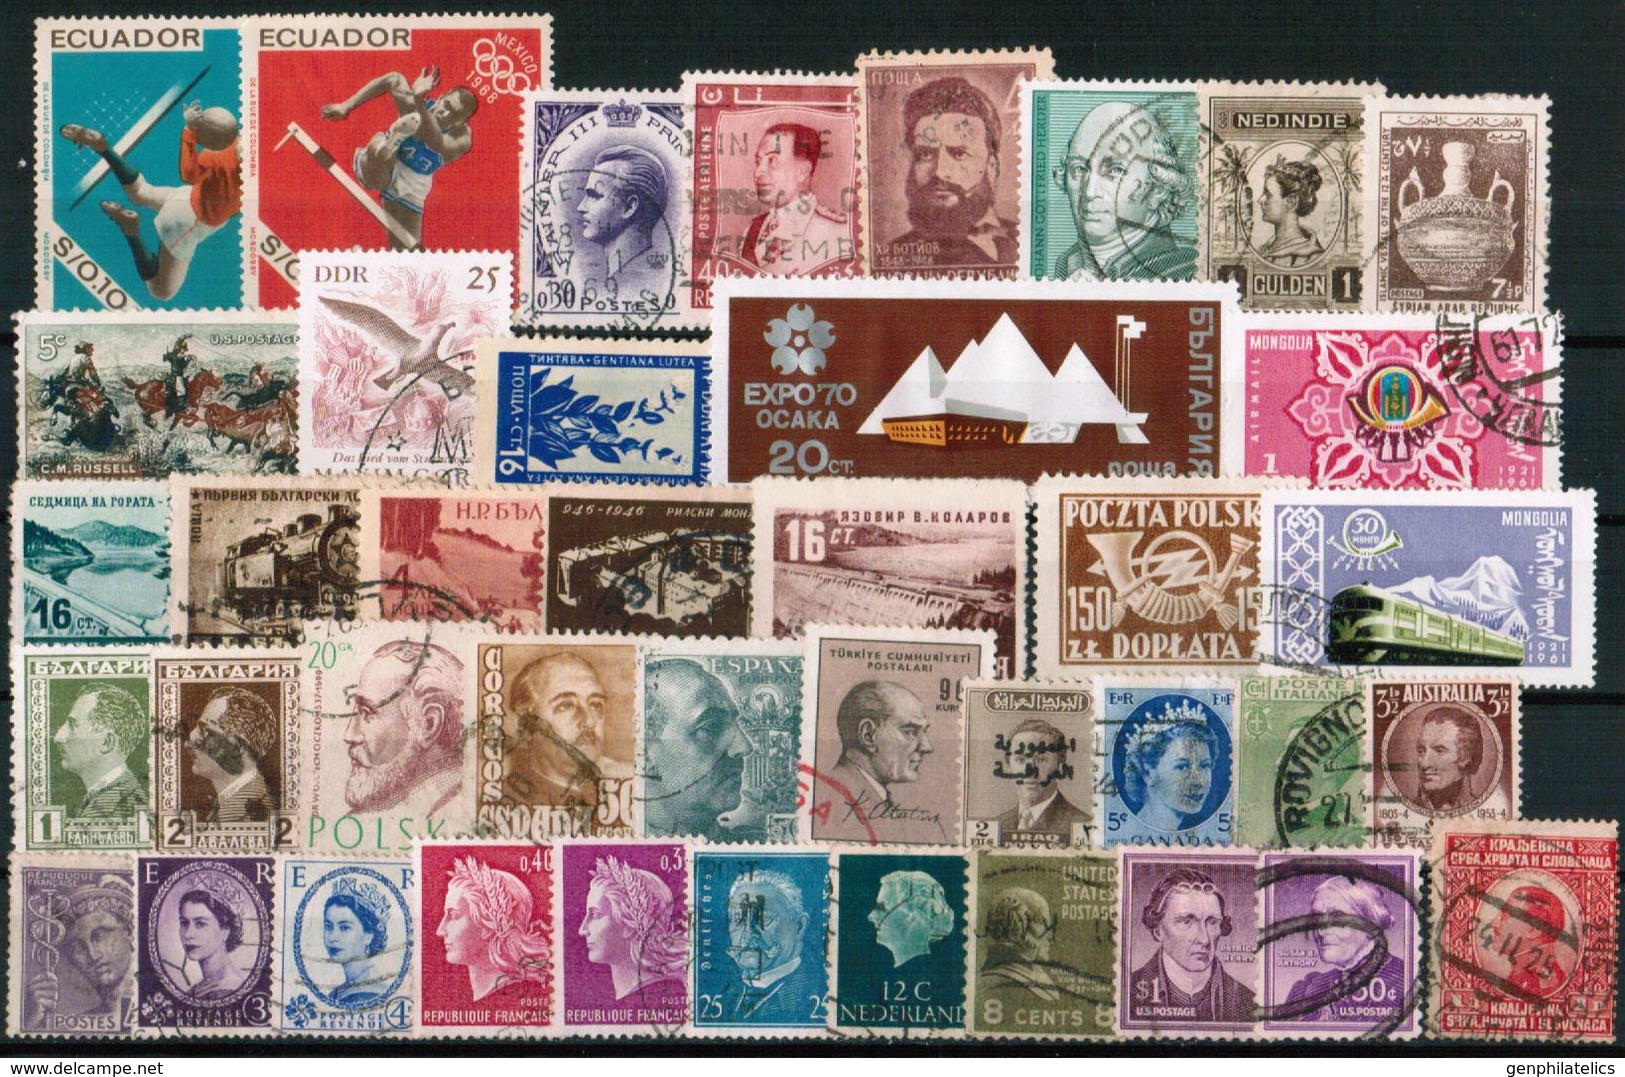 Lot of 283 stamps (9 scans) - different countries